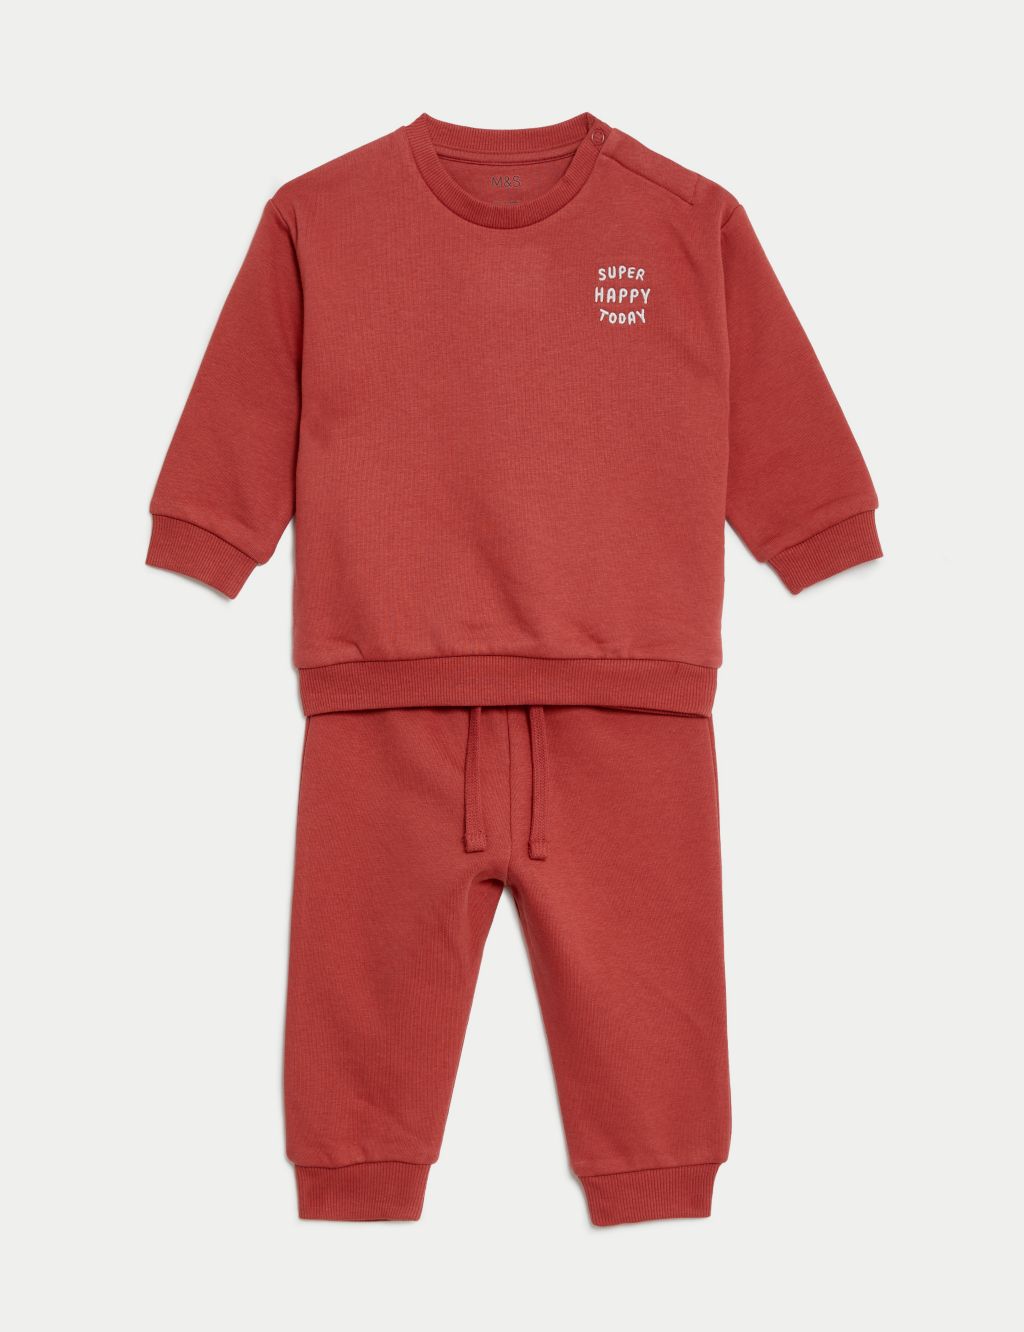 2pc Cotton Rich Sweater and Jogger Outfit (0-3 Yrs) image 1